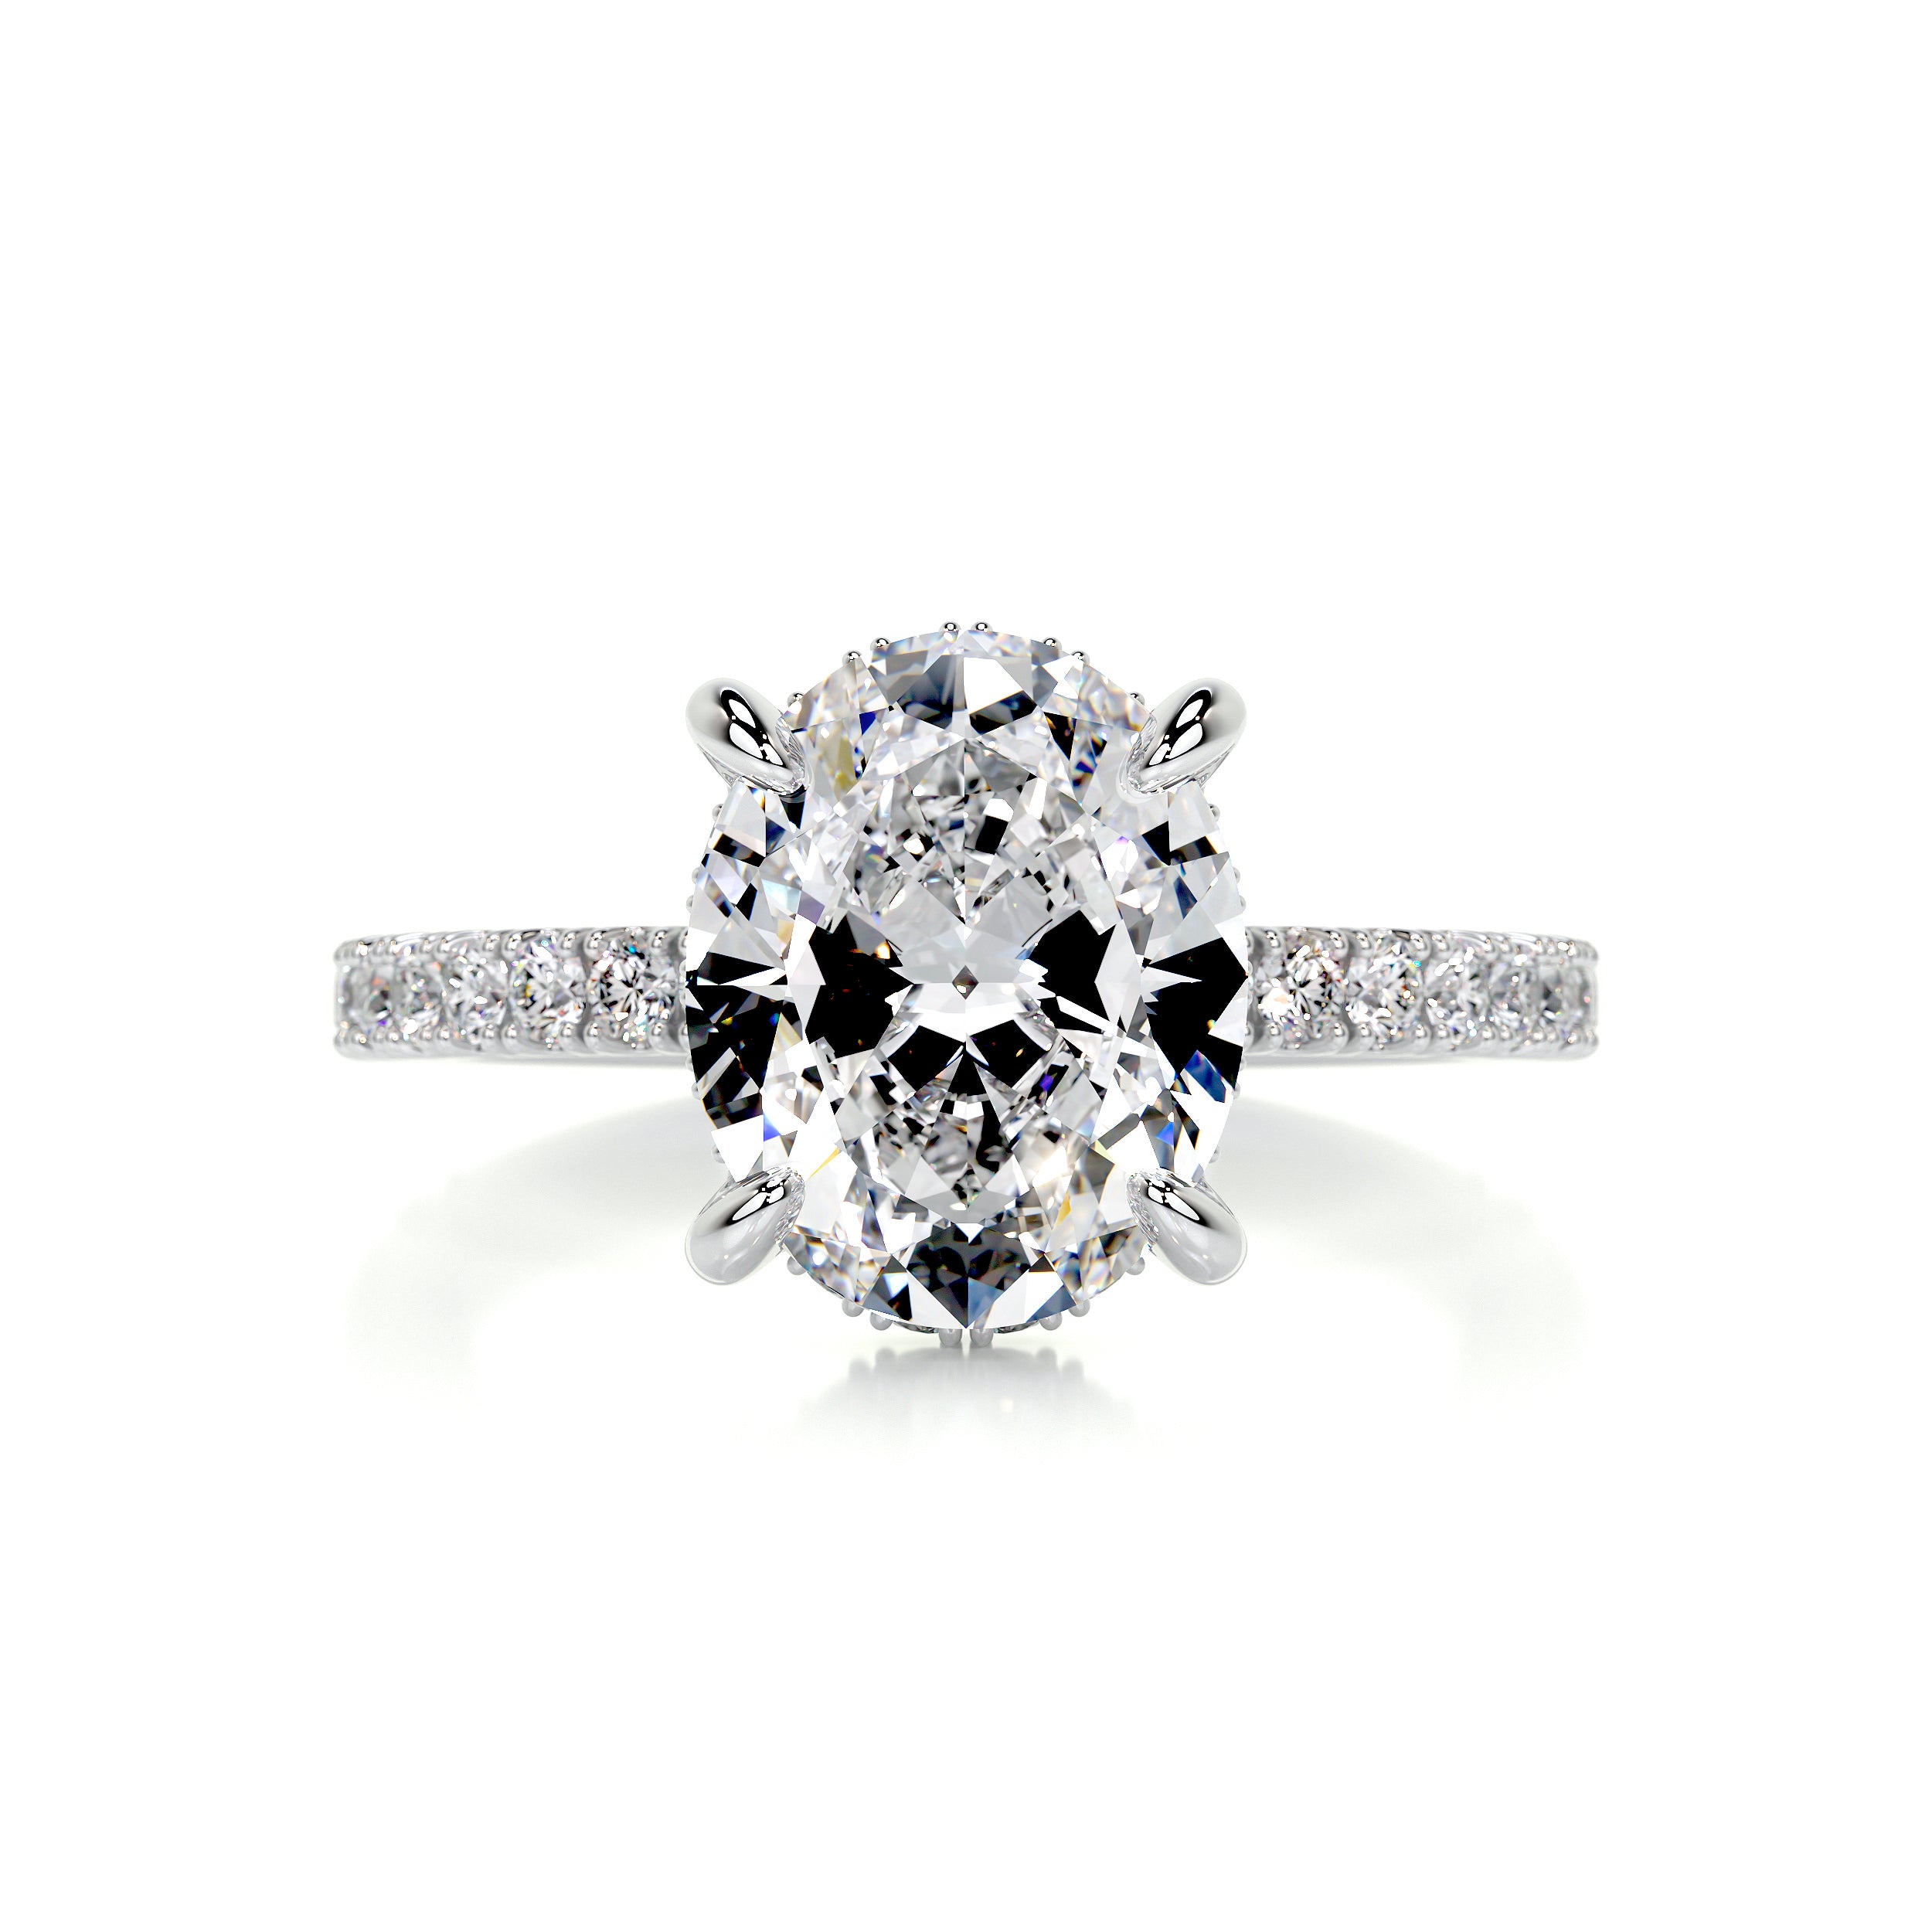 Lucy Diamond Engagement Ring -14K White Gold